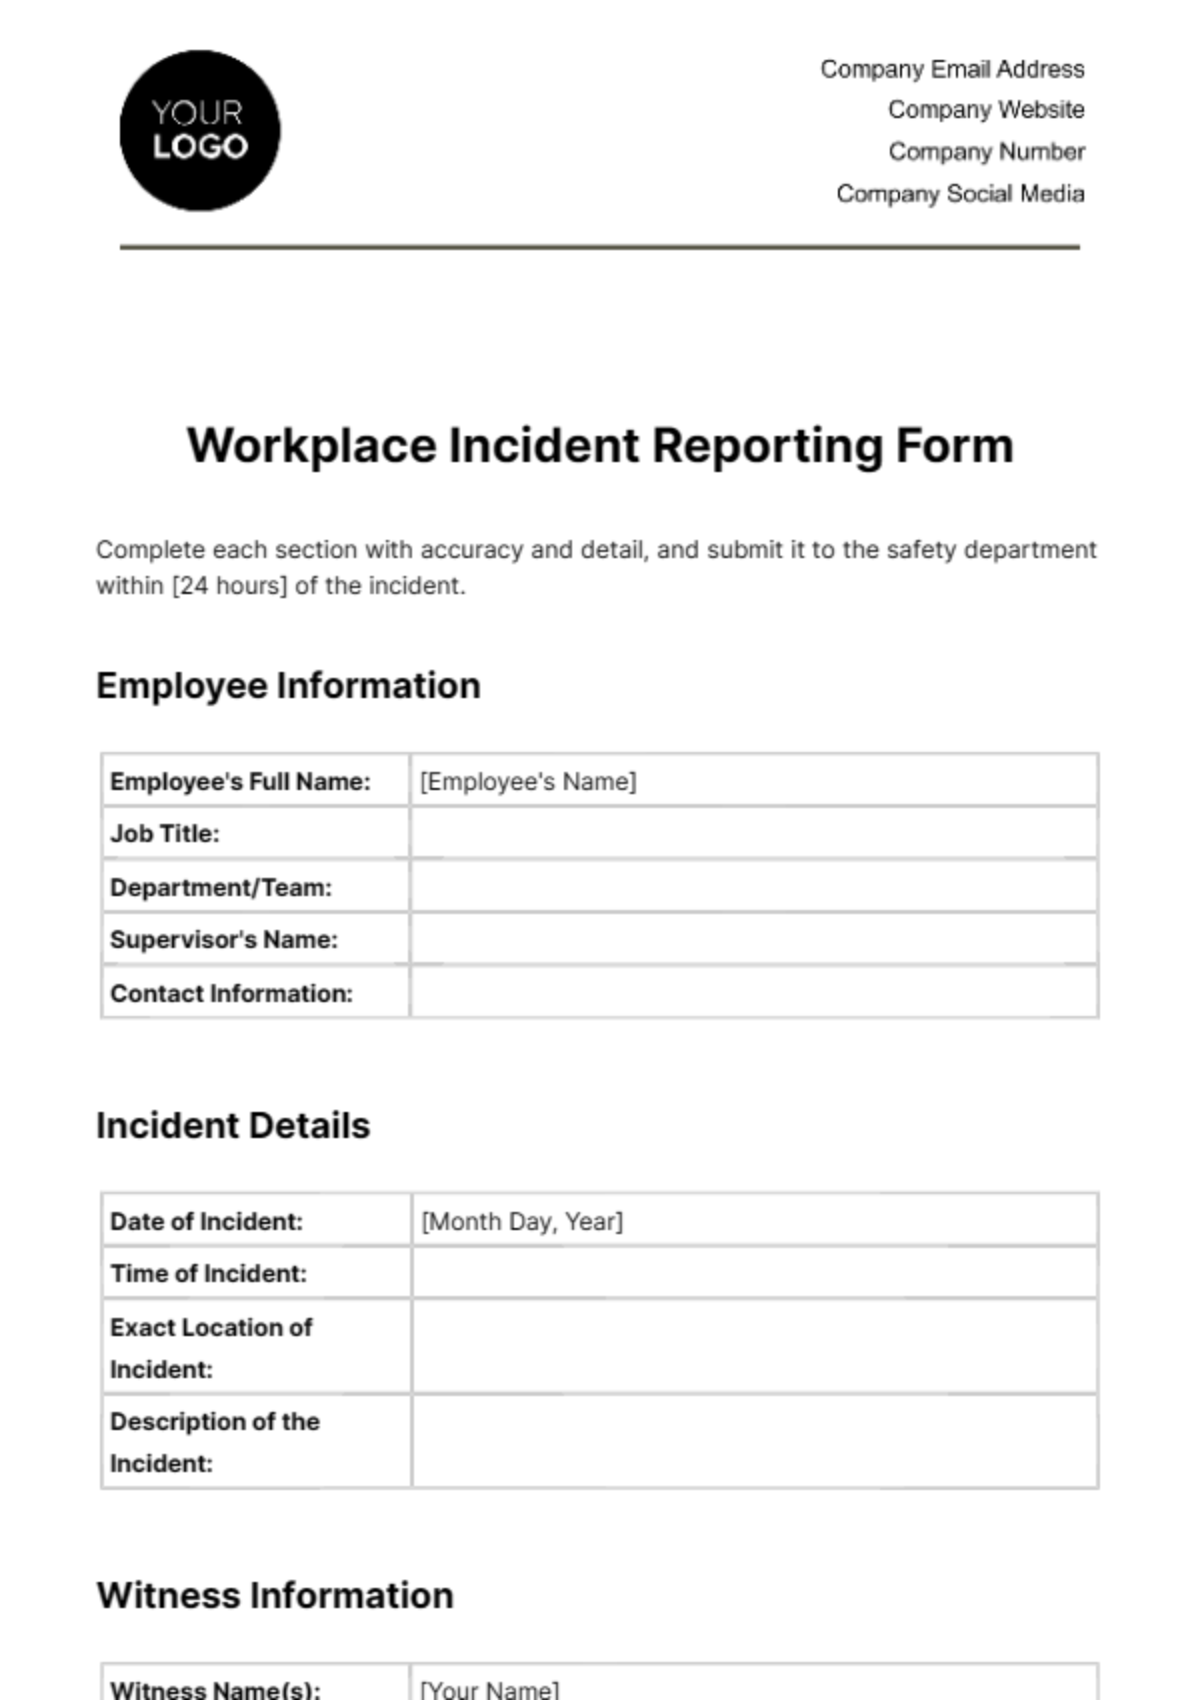 Workplace Incident Reporting Form Template